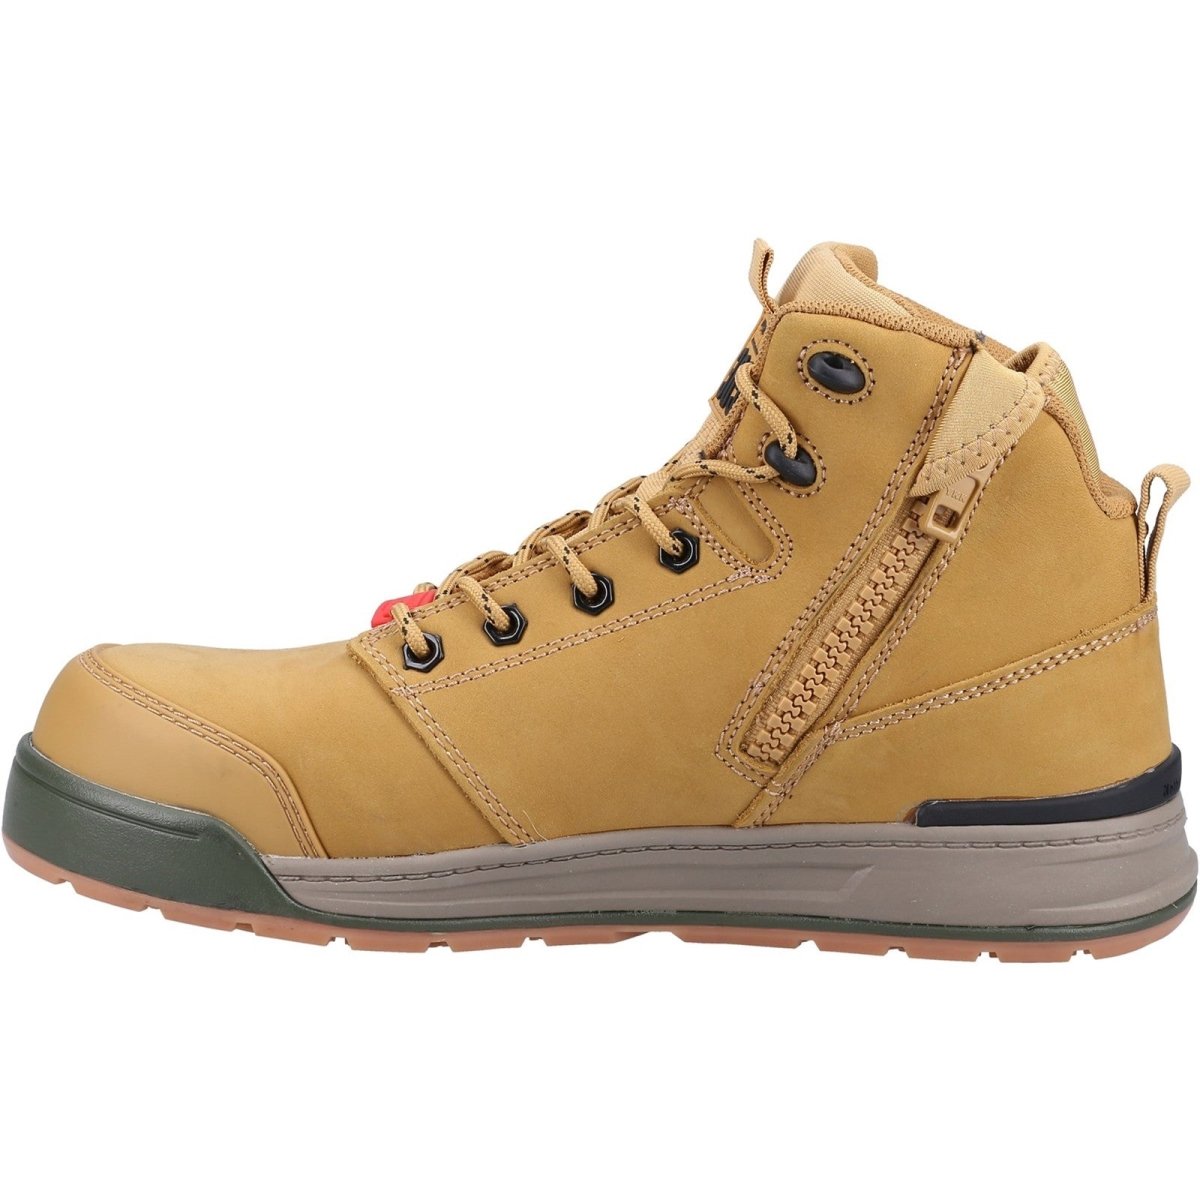 Hard Yakka 3056 Mens Lace & Zip Composite Safety Boots - Shoe Store Direct